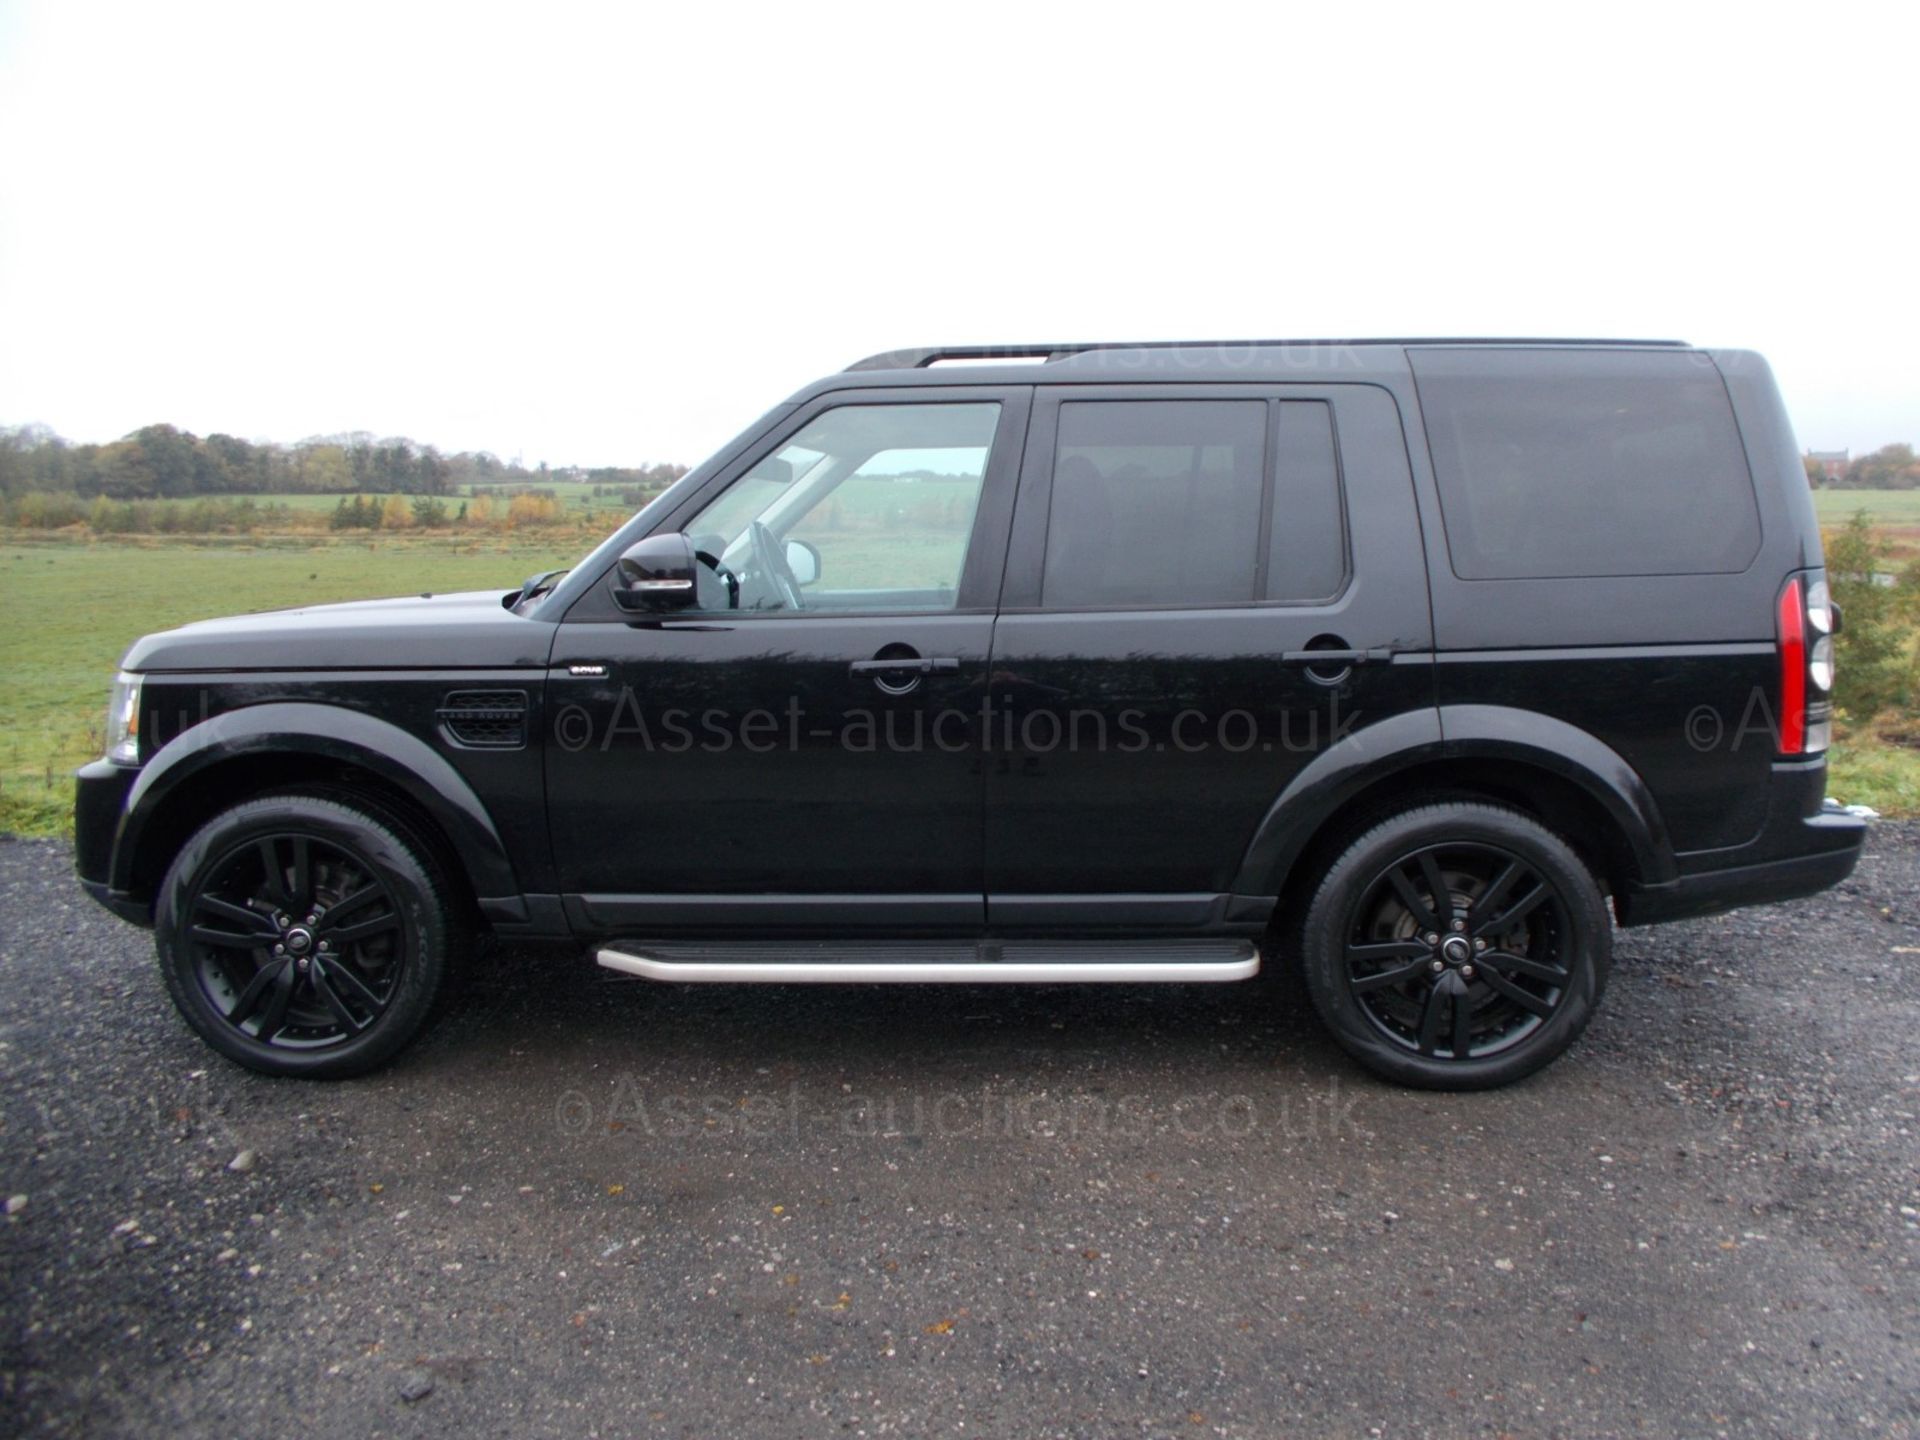 2015/64 LAND ROVER DISCOVERY HSE LUXURY SCV6 7 SEATER, 3.0 V6 PETROL SUPERCHARGED *PLUS VAT* - Image 4 of 27